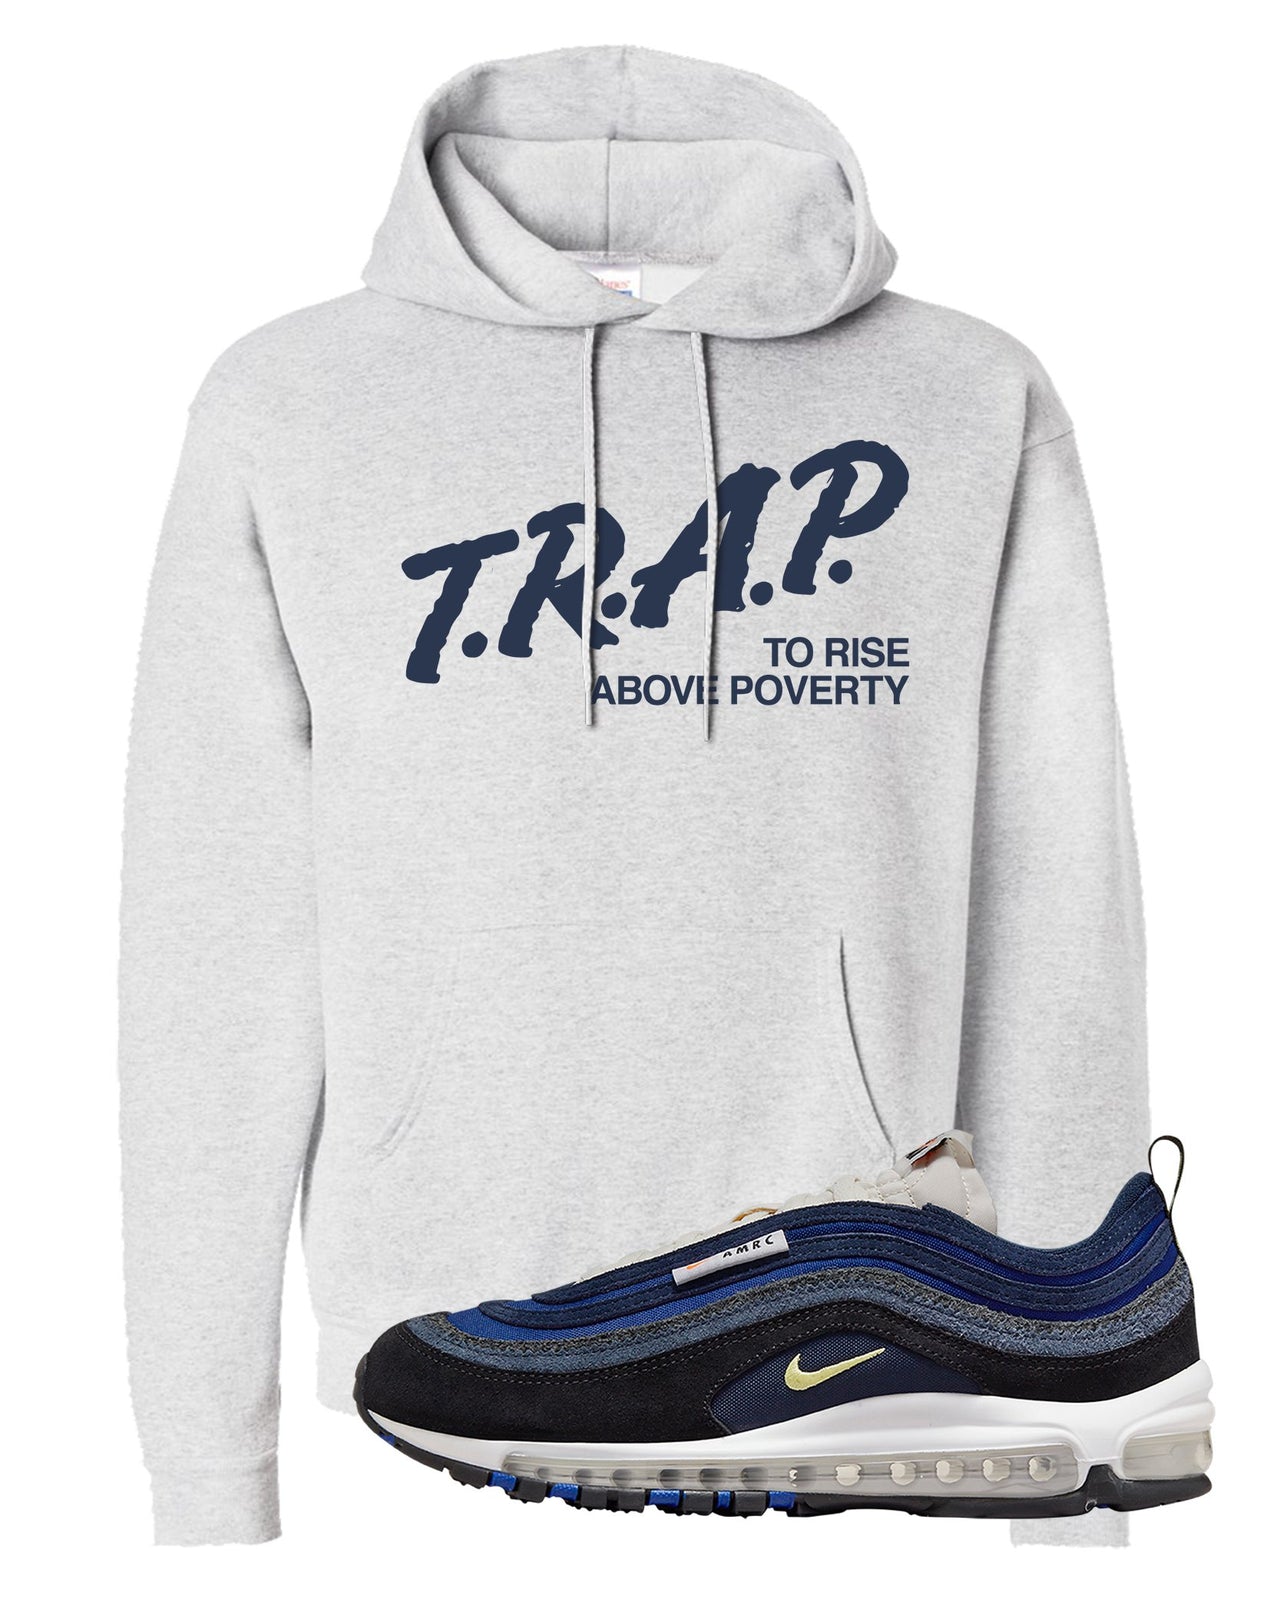 Navy Suede AMRC 97s Hoodie | Trap To Rise Above Poverty, Ash